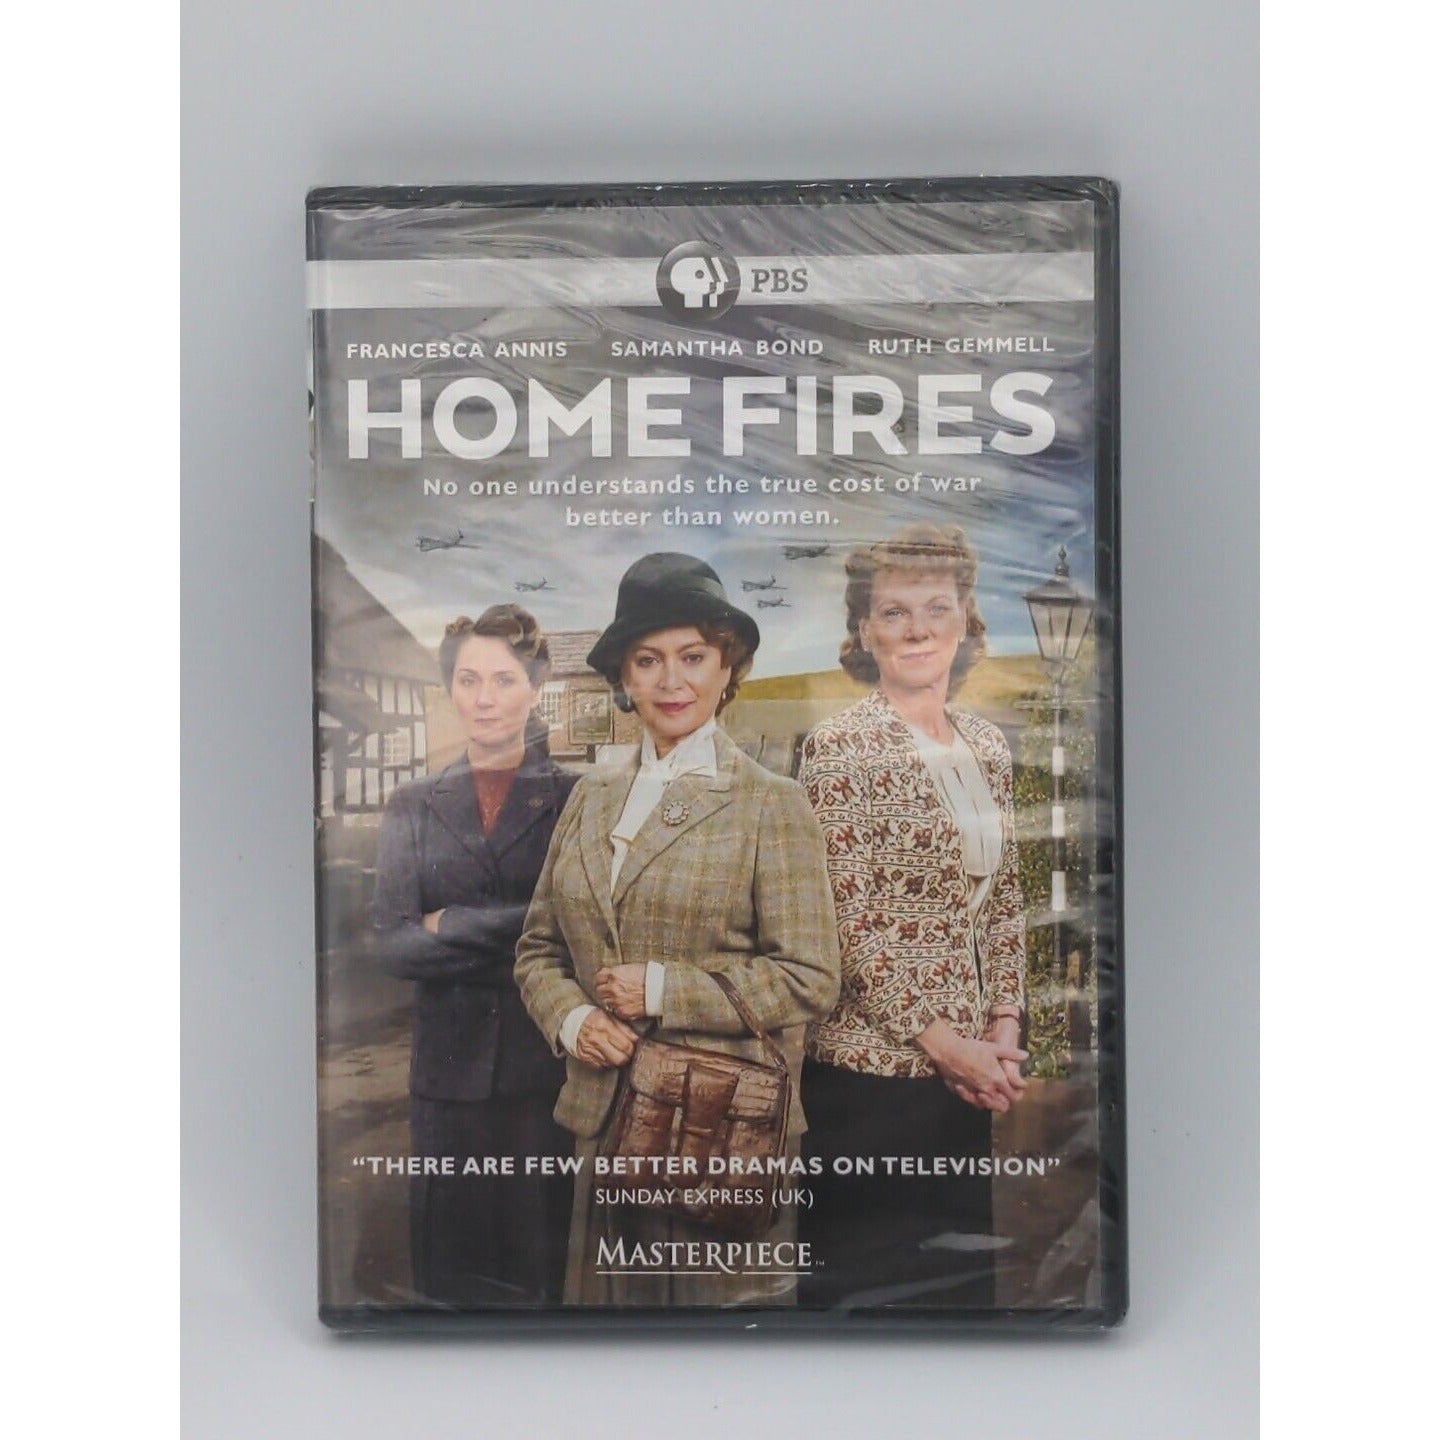 Home Fires: The Complete First Season (Masterpiece) (DVD, 2015) New-Sealed